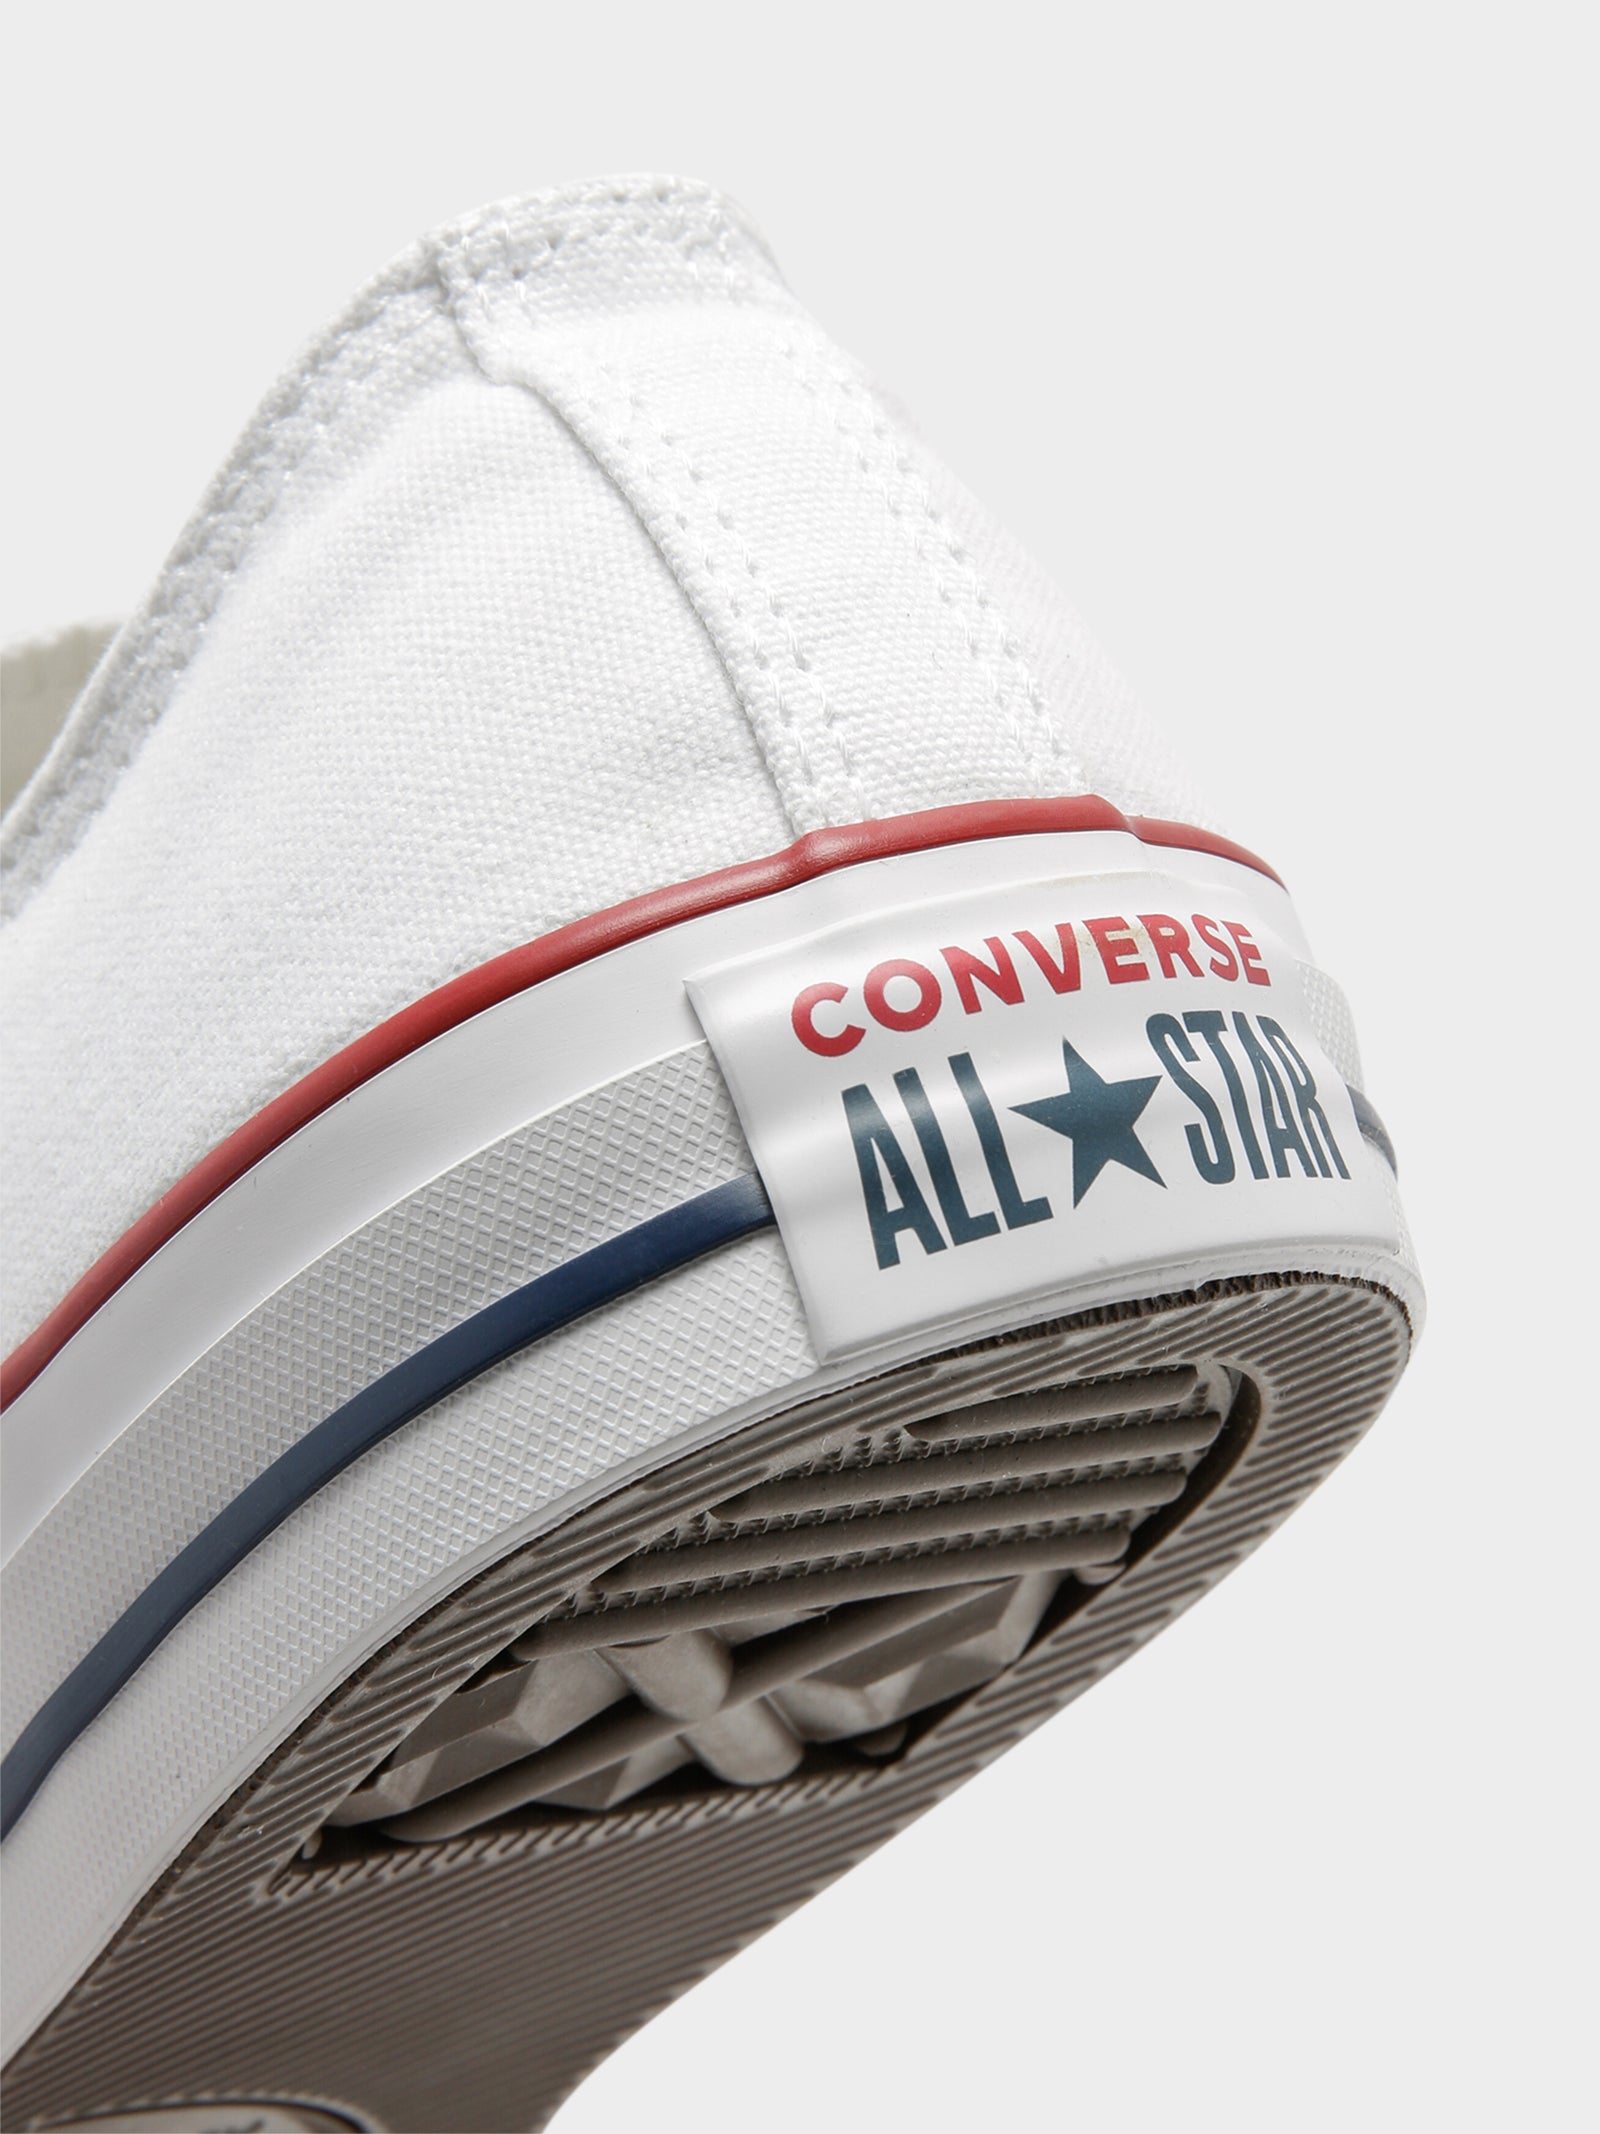 Unisex Taylor All Star Classic Low-Top Sneakers in White - Glue Store